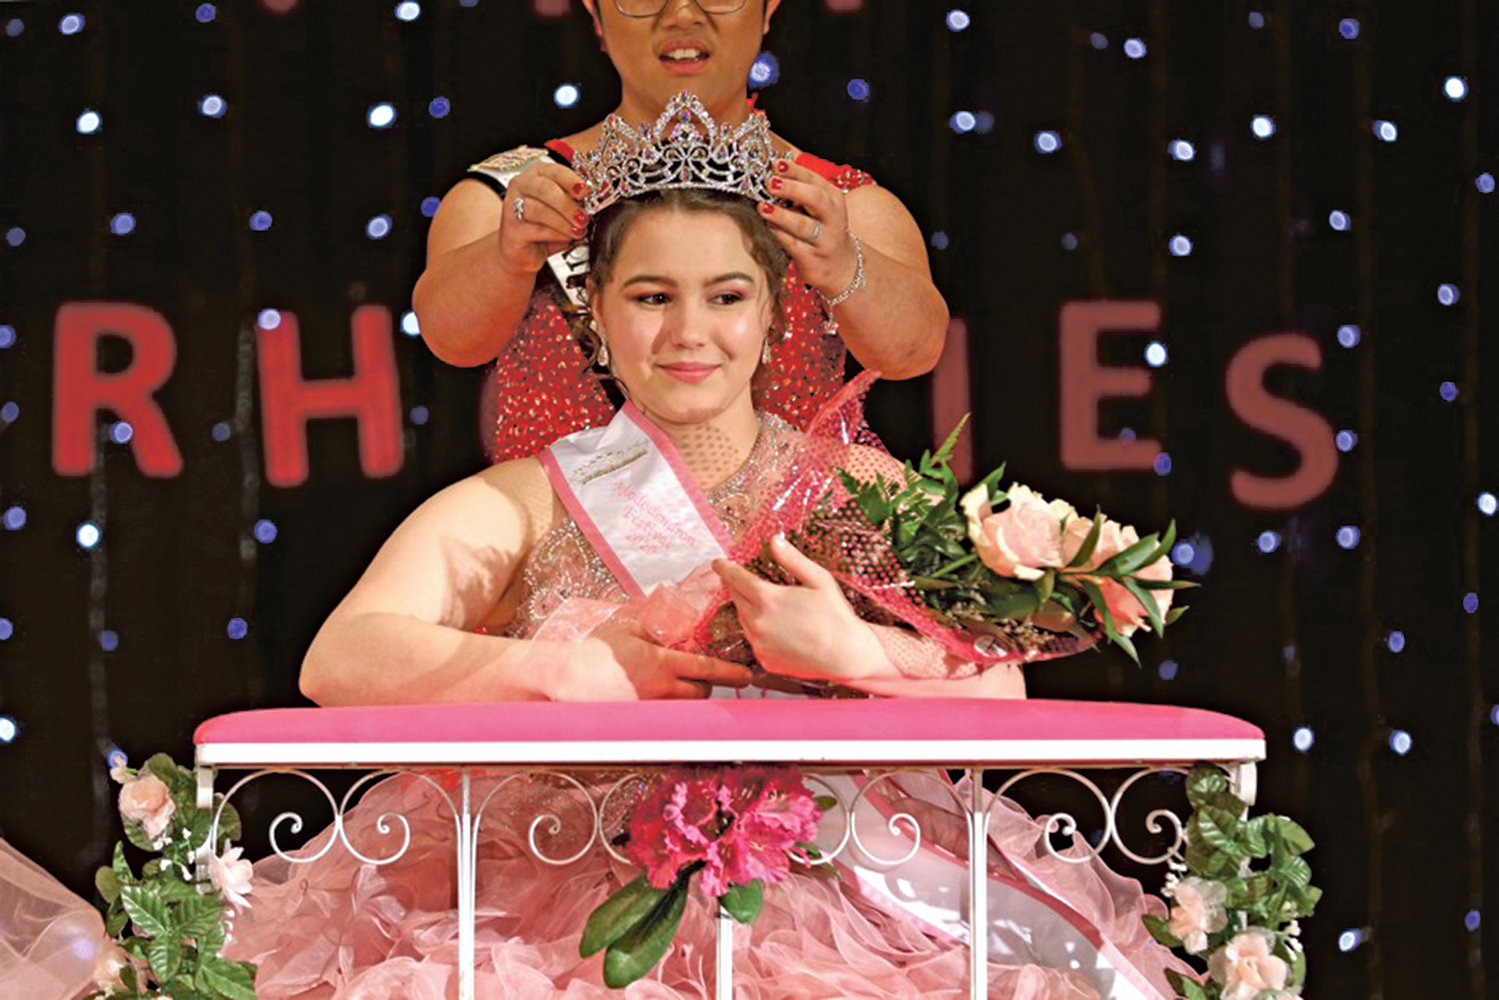 Hailey Hirschel was crowned princess at the Feb. 8 coronation ceremony.